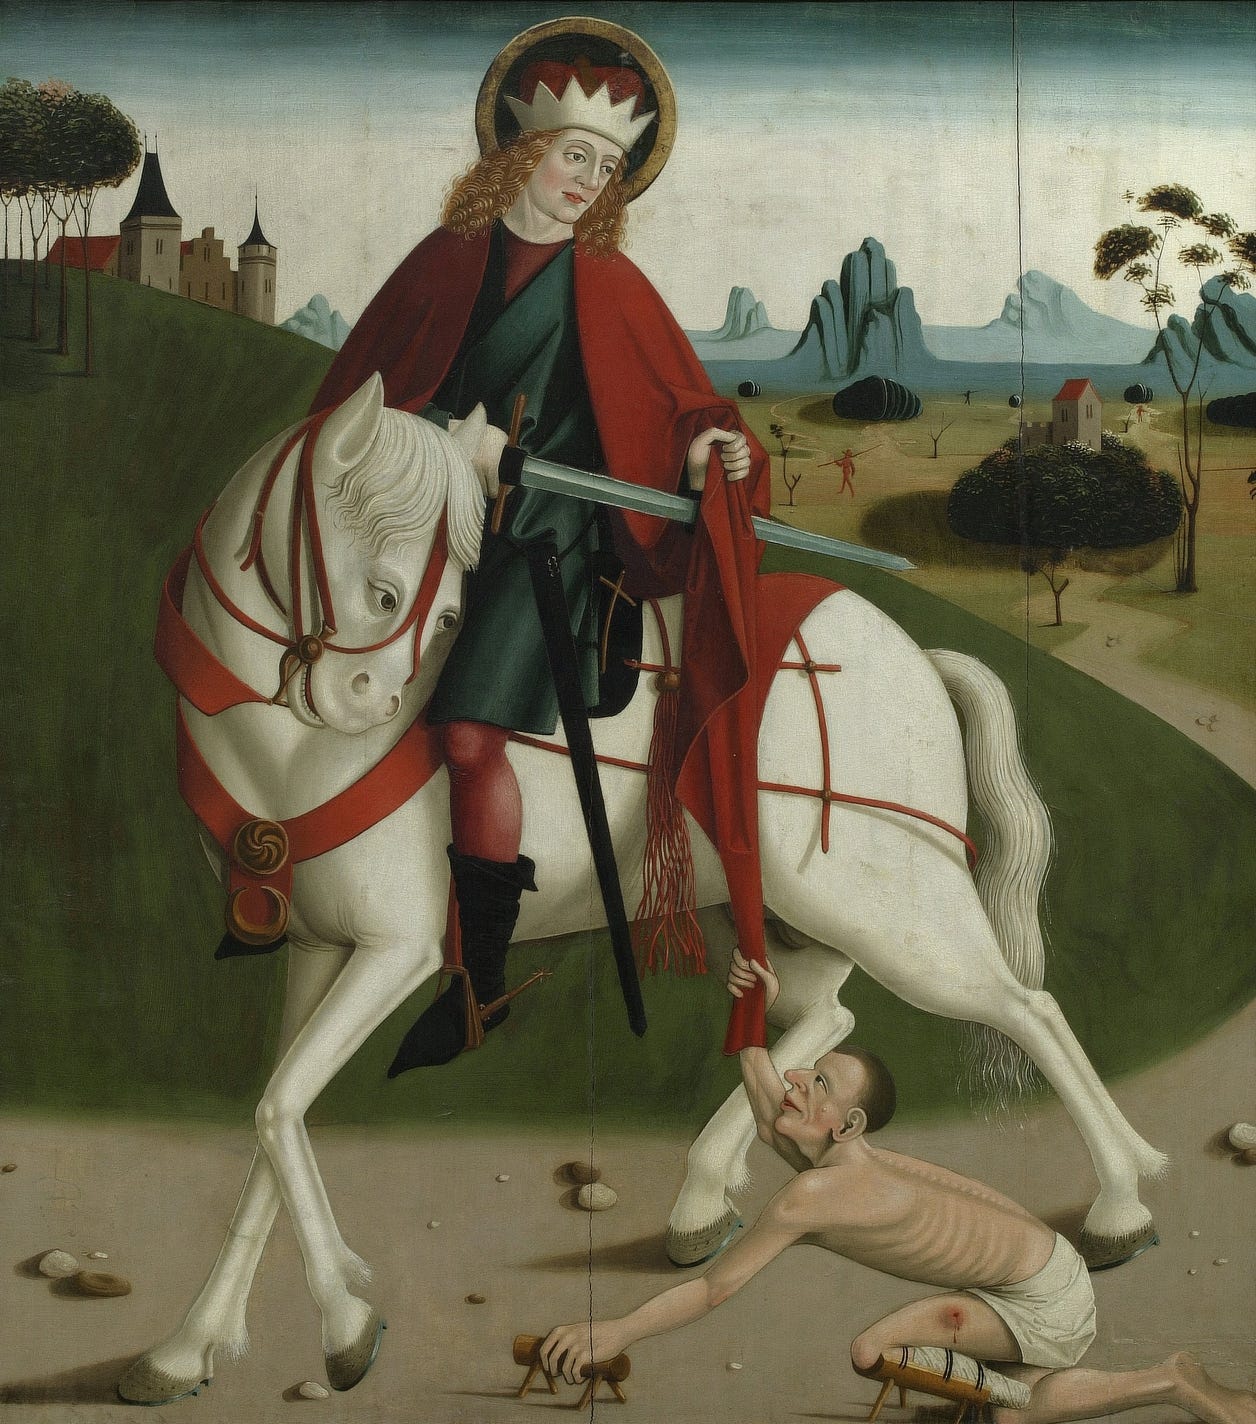 A saint on a horse wearing a red robe and crown has a beggar with a crutch tugging at his robe